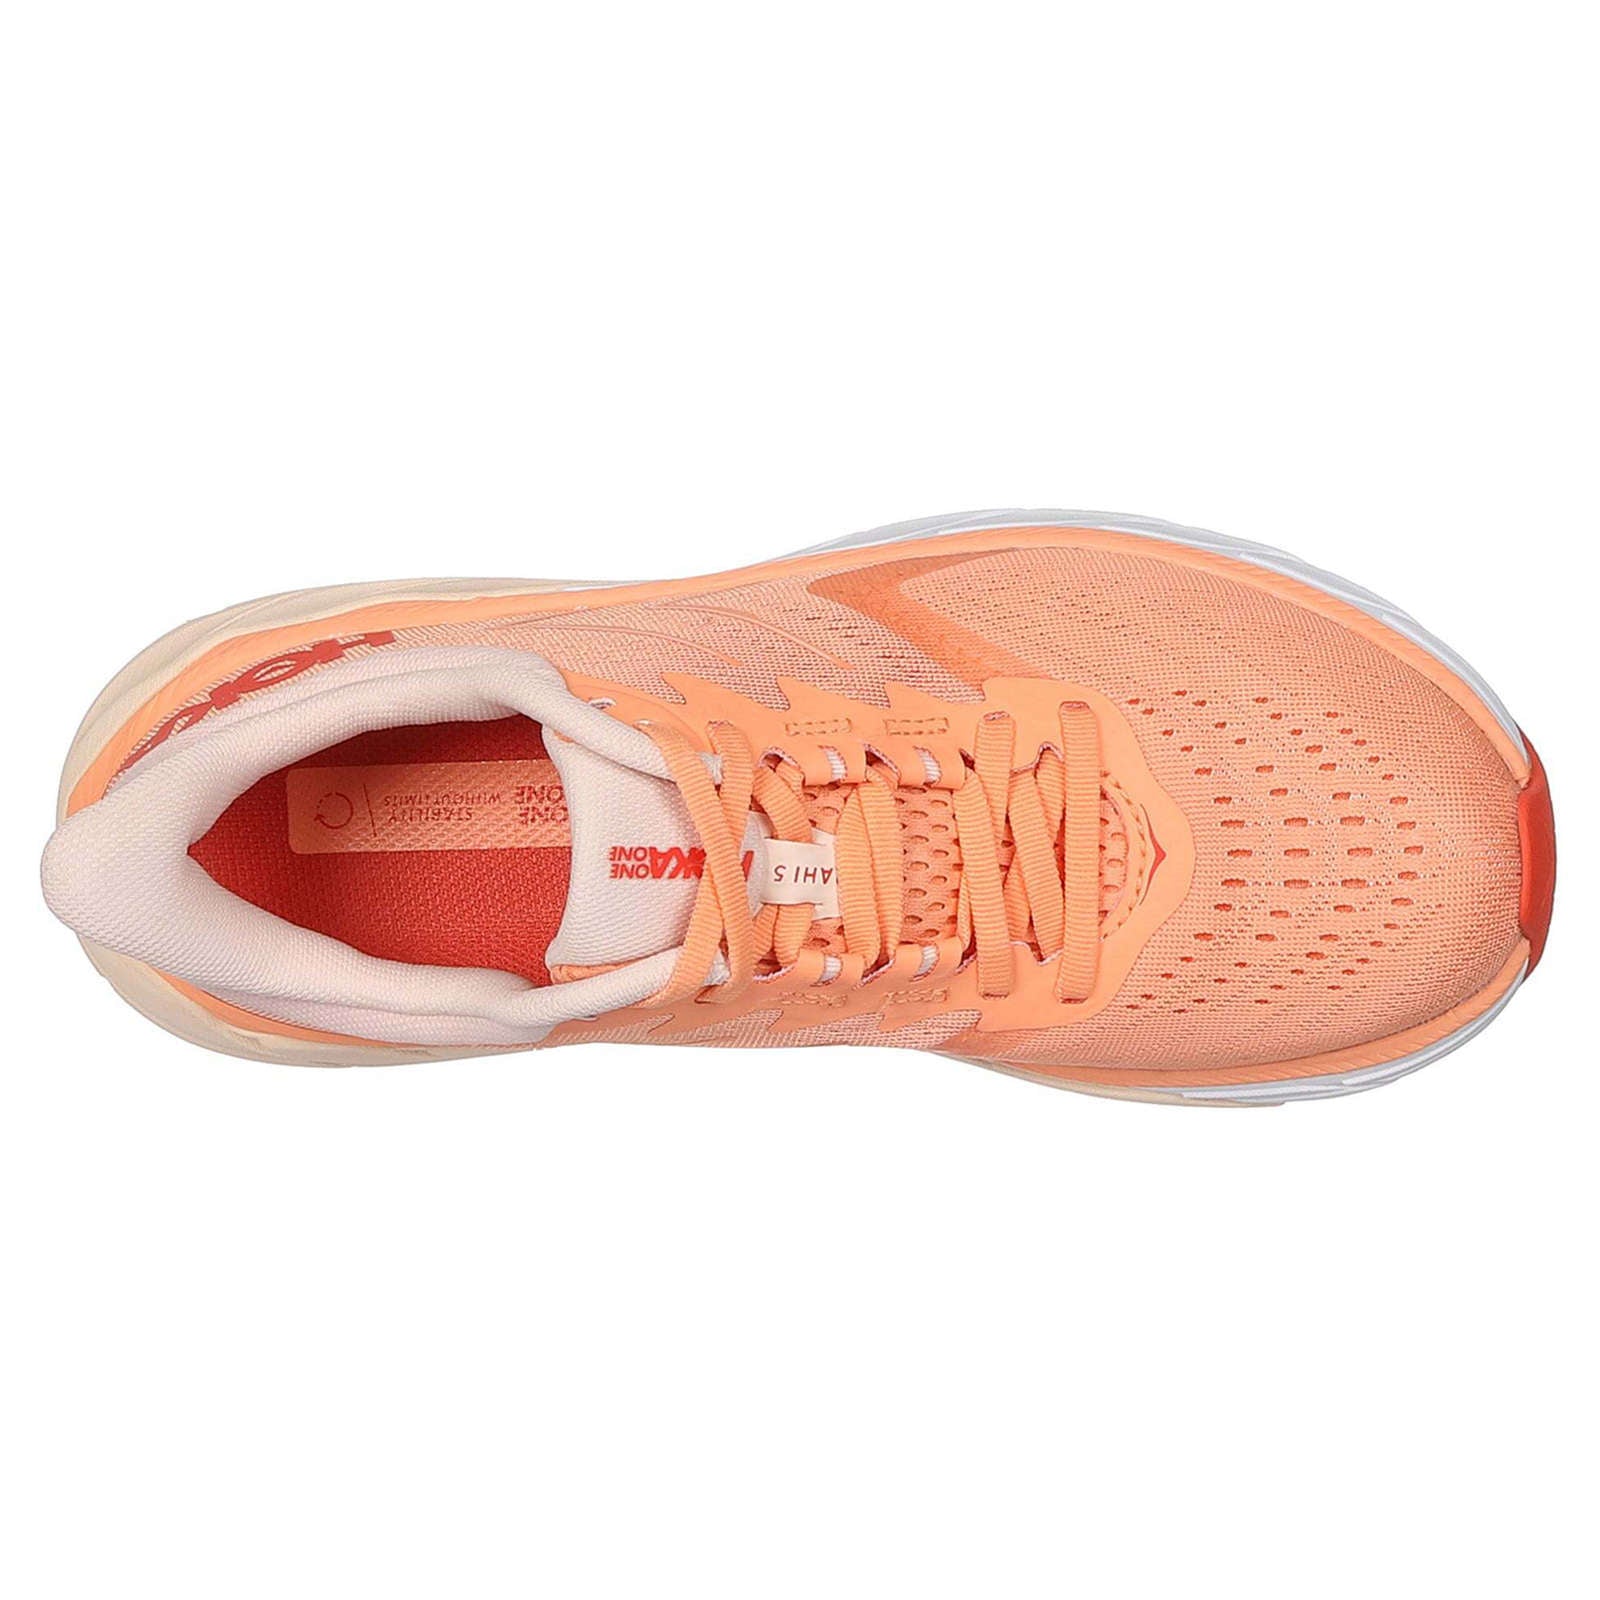 Hoka One One Arahi 5 Synthetic Textile Women's Low-Top Road Running Sneakers#color_cantaloupe silver peony